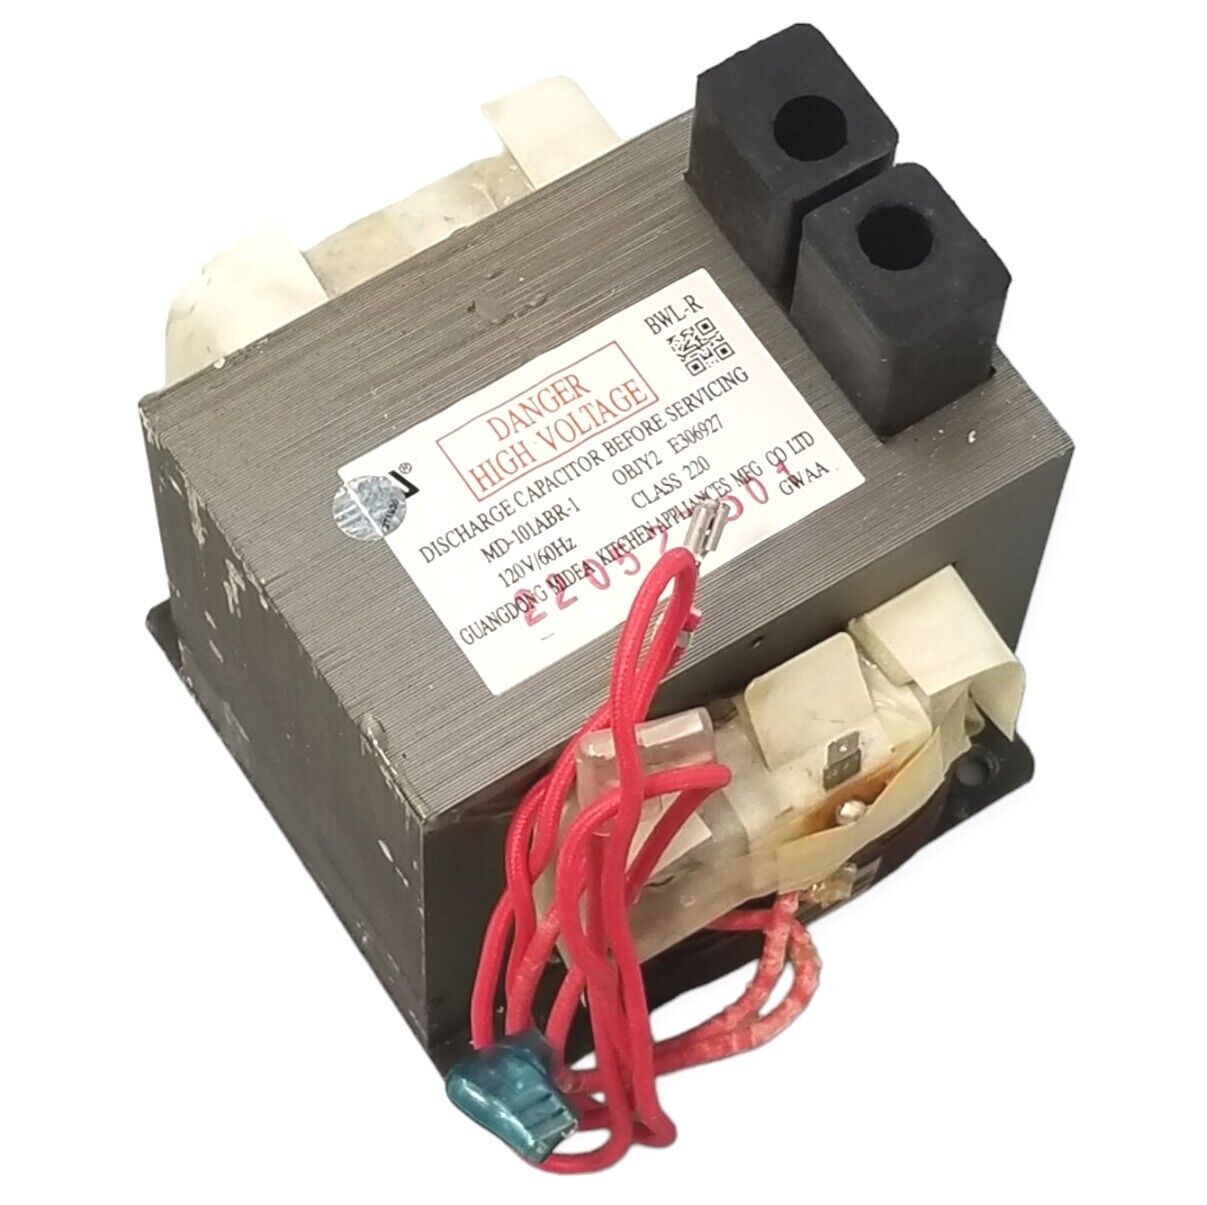 New Genuine OEM Replacement for Frigidaire Microwave Oven Transformer 5304514249